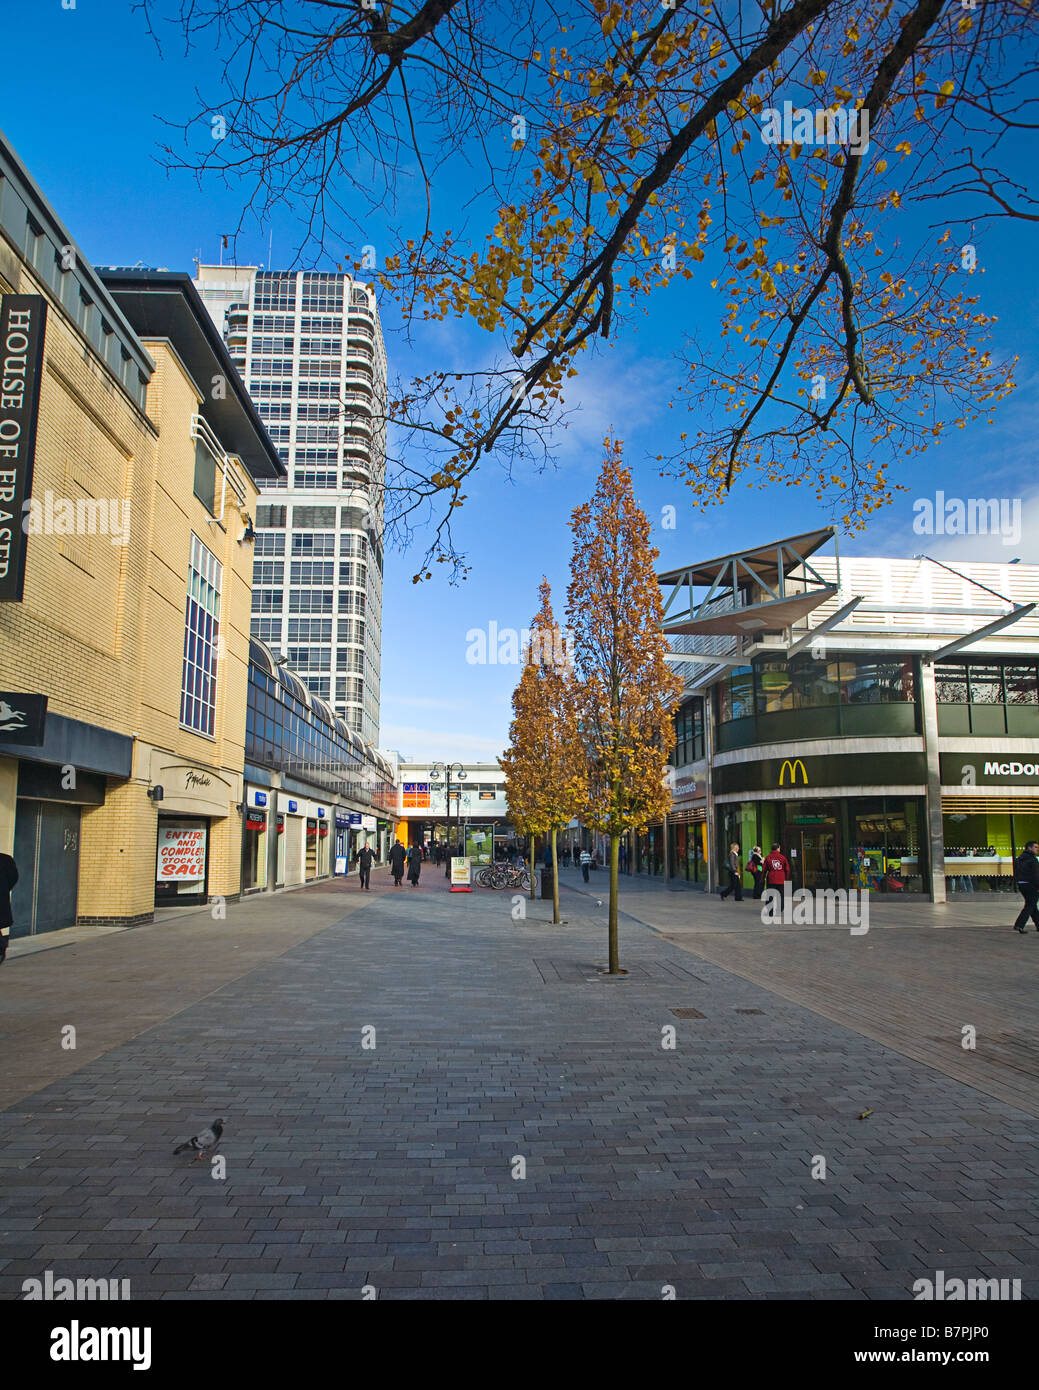 Swindon Hight Street looking by the Brunel centre. Blue sky overhead with autum colours on the trees. Stock Photo